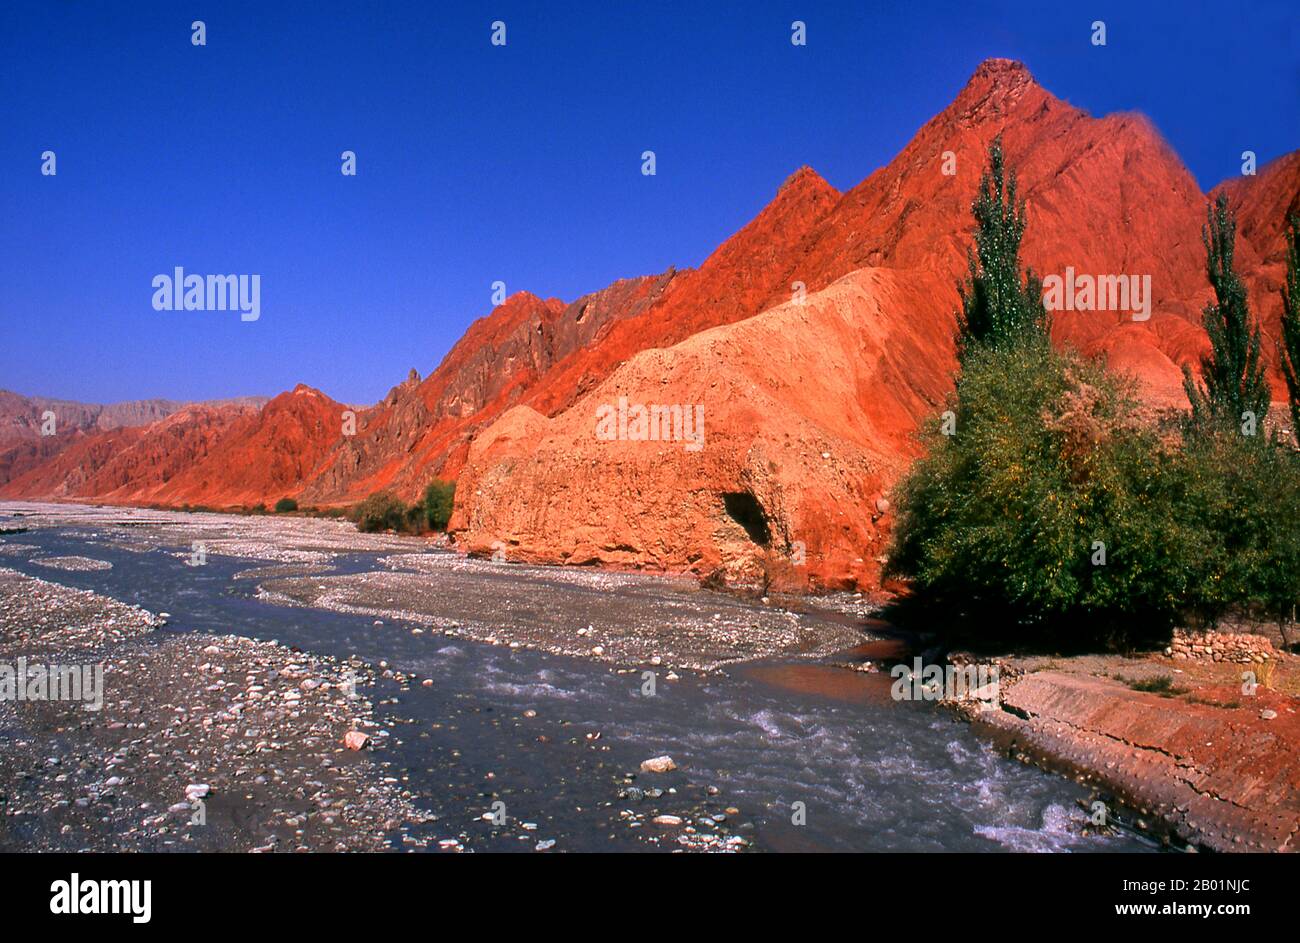 China: The red mountains of the Ghez River (Ghez Darya) canyon, Karakoram Highway, Xinjiang.  The Zhongba Gonglu or Karakoram Highway is an engineering marvel that was opened in 1986 and remains the highest paved road in the world. It connects China and Pakistan across the Karakoram mountain range, through the Khunjerab Pass, at an altitude of 4,693 m/15,397 ft. Stock Photo